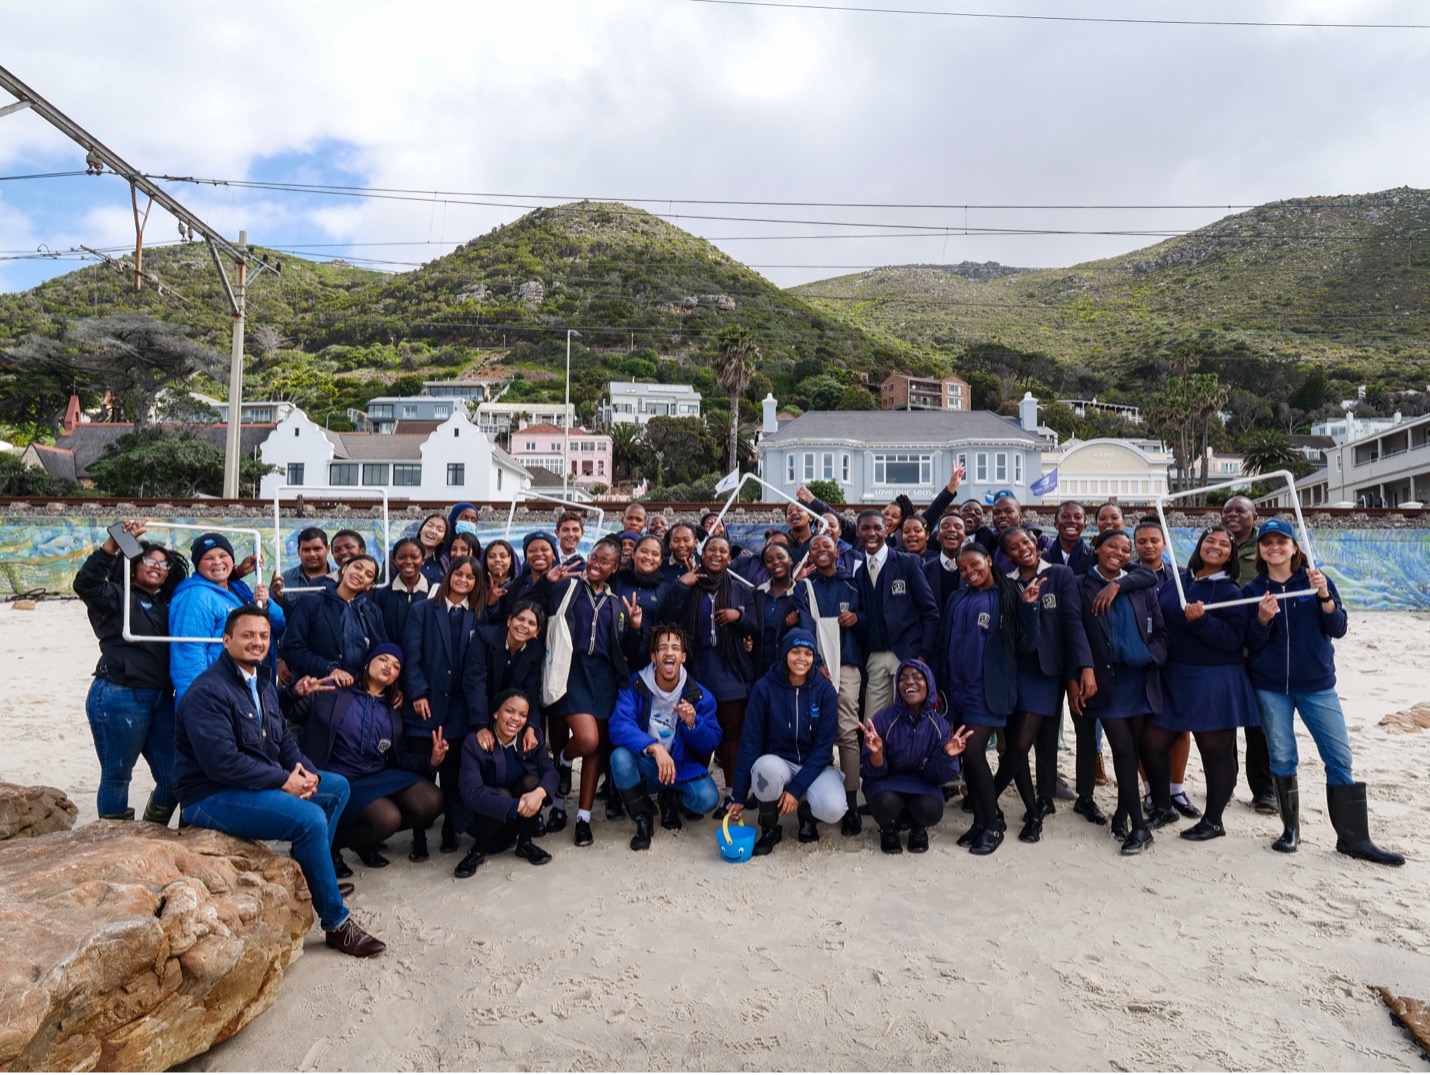 Our dedicated education team in action teaching high school students how to conduct transect surveys of the rocky shore ecosystem. Image by Danel Wentzel.